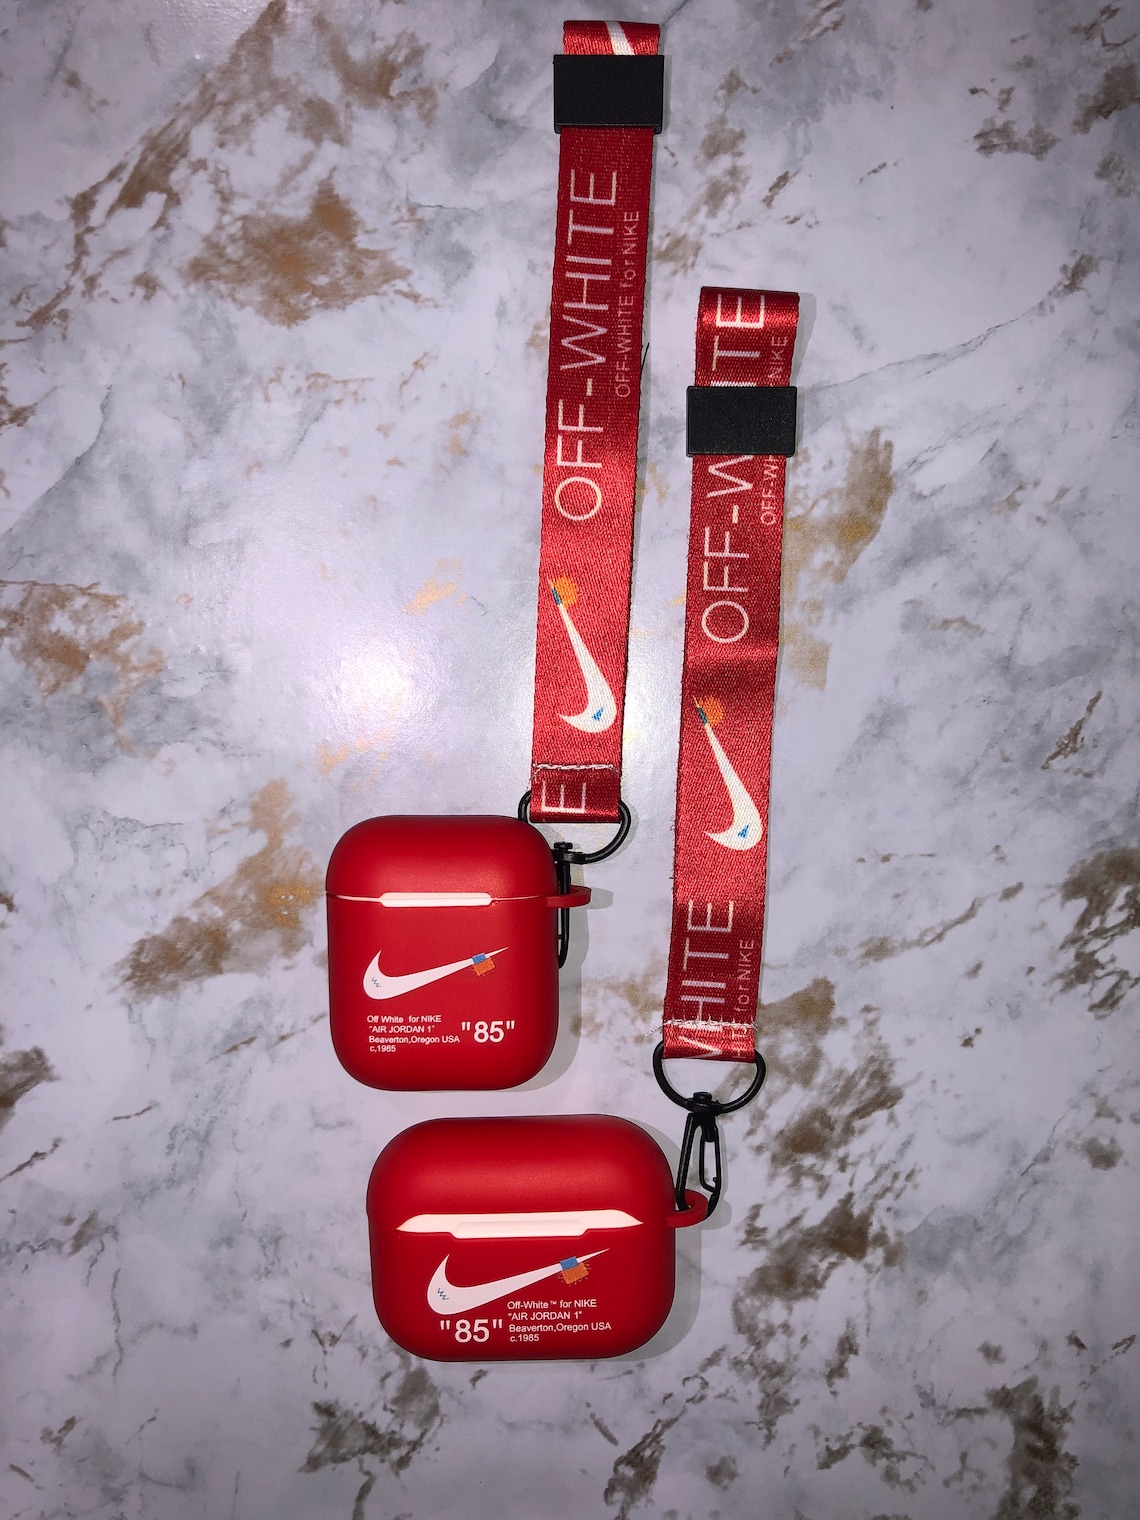 Nike Off-White AirPods Case with Lanyard For AirPods Gen 1 2 | Etsy